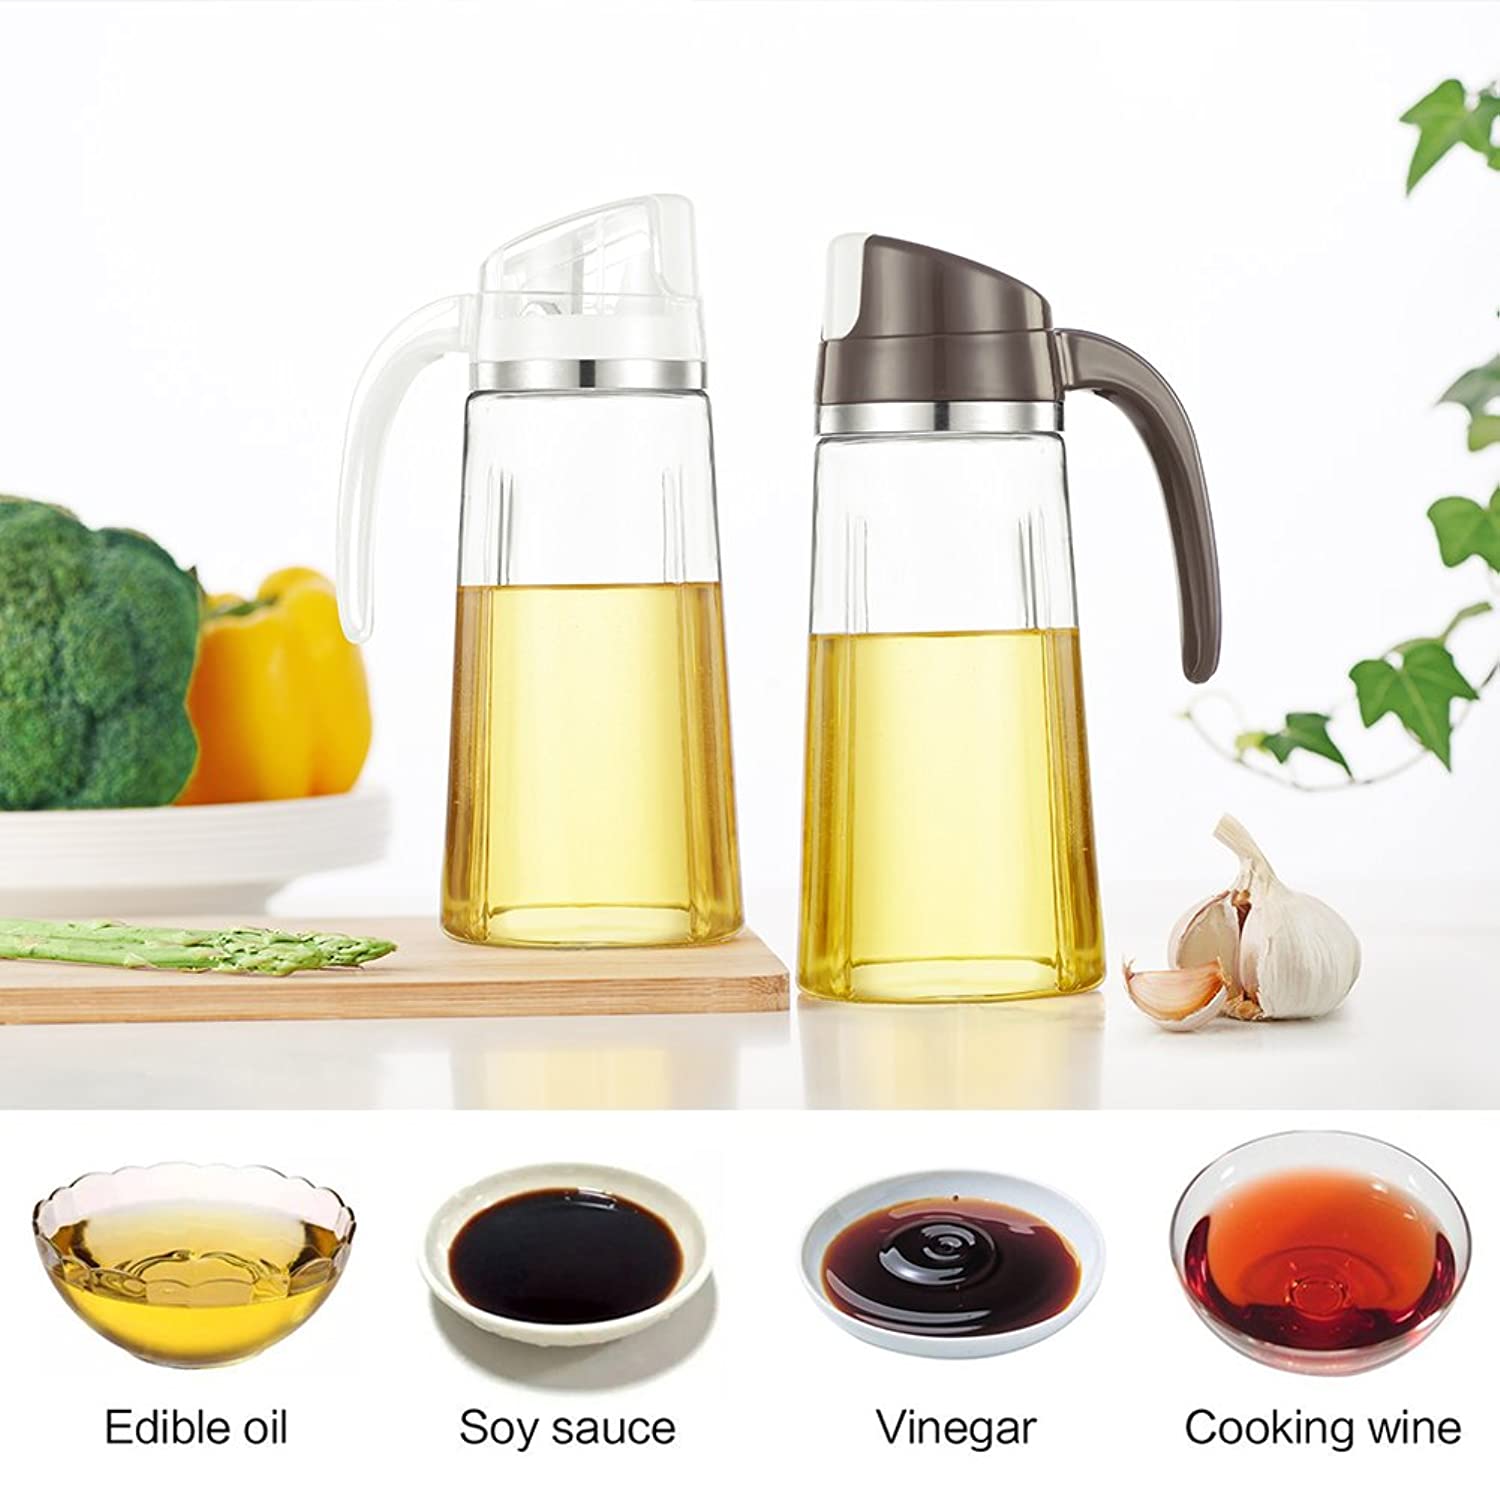 FARI Olive Oil Dispenser Bottles, Automatic Opening and Closing